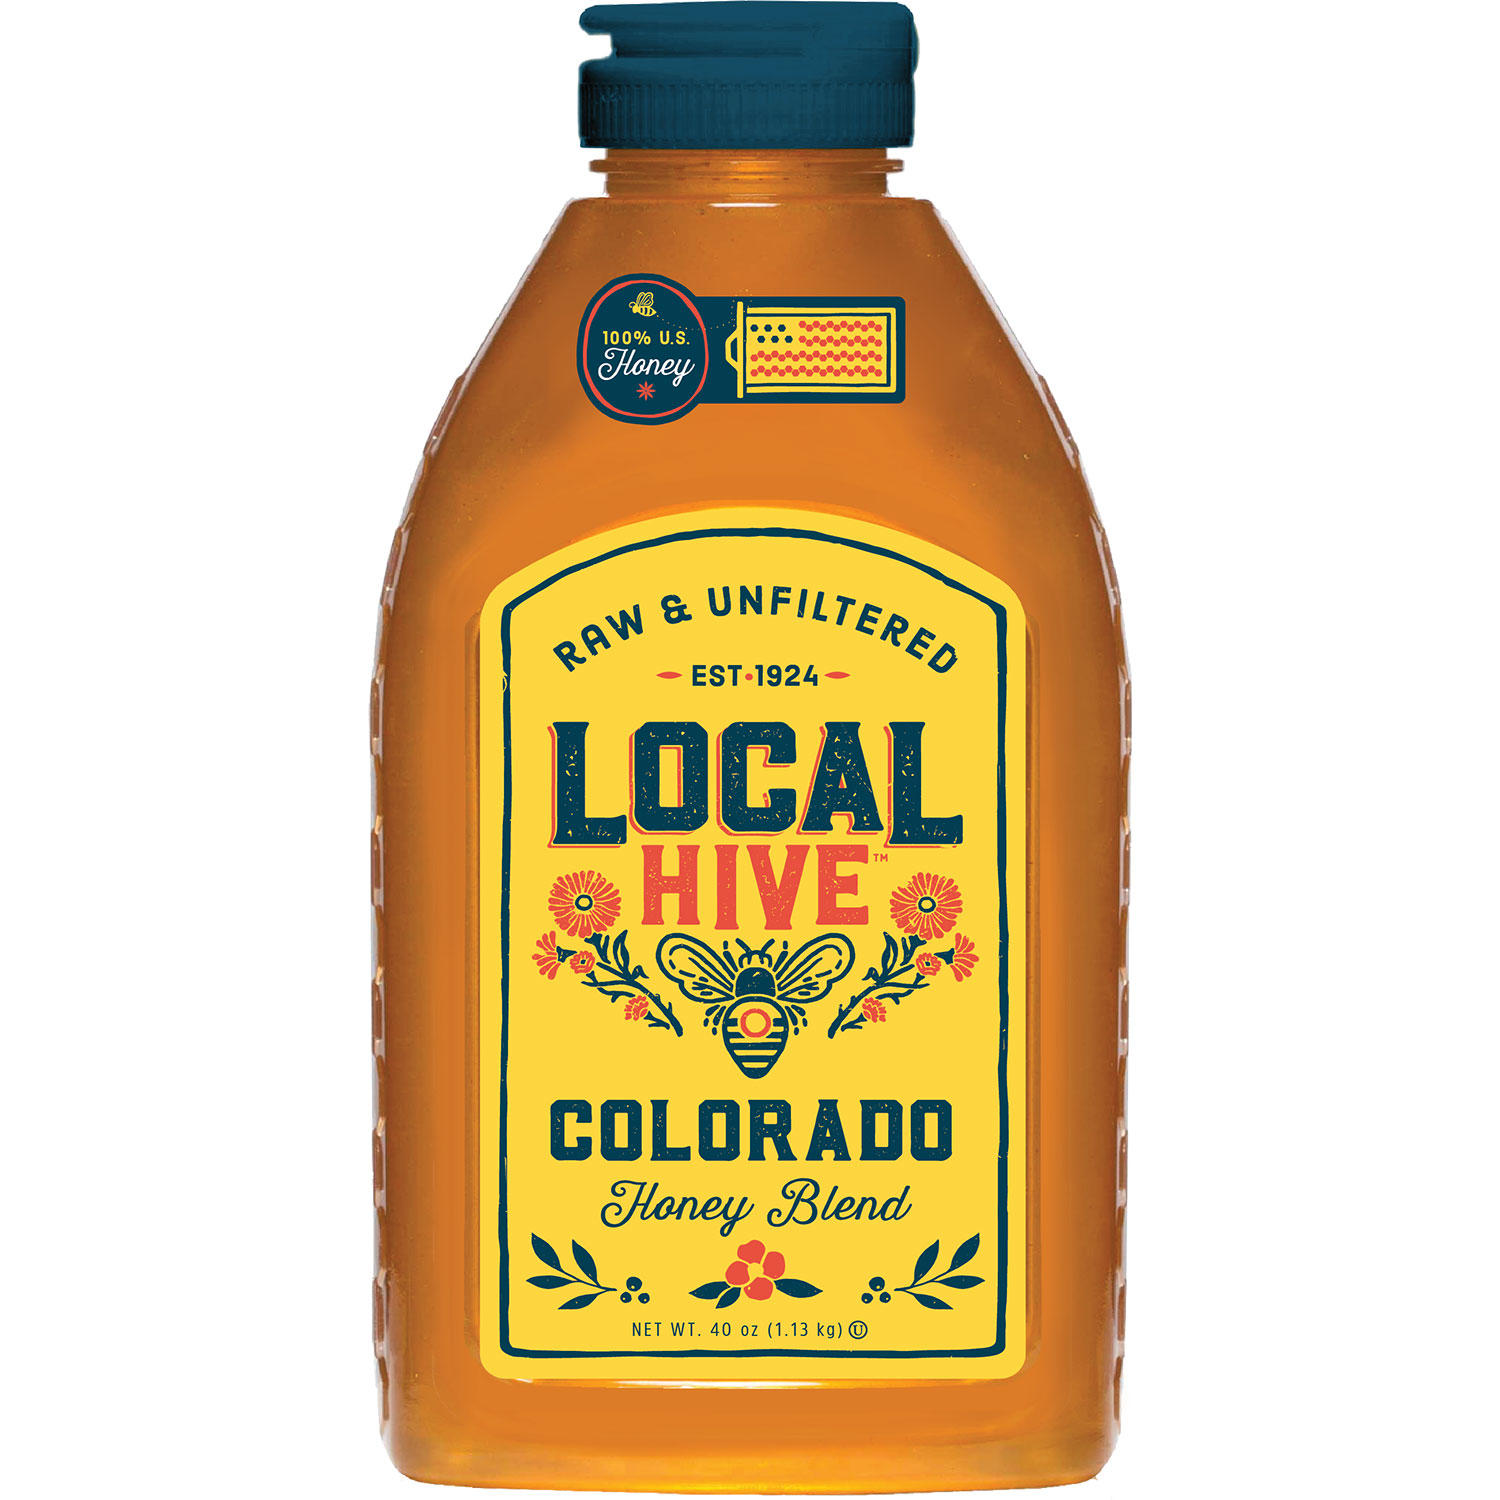 Local Hive Colorado Raw and Unfiltered Honey